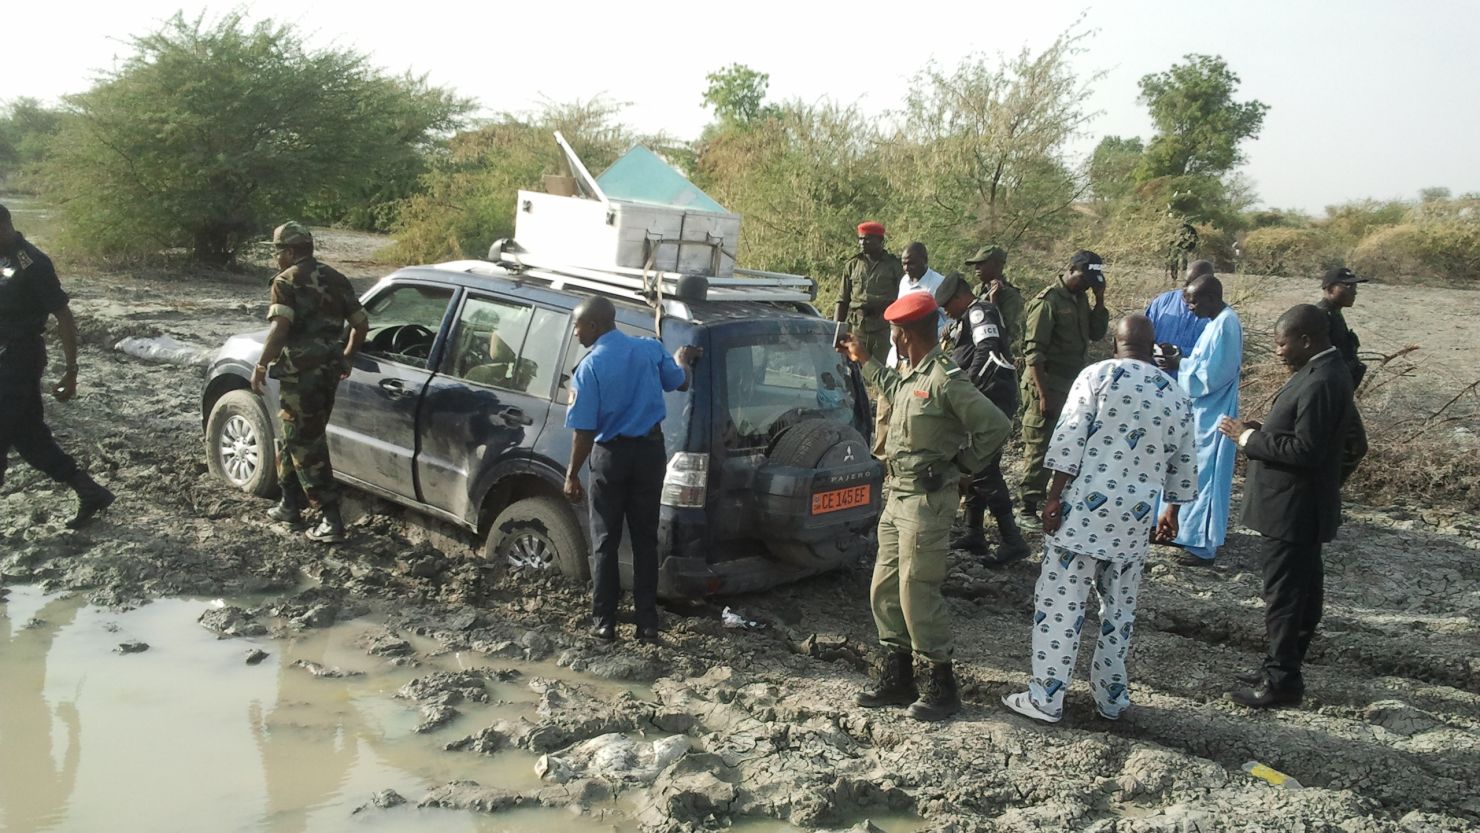 Cameroonian security officials stand at the vehicle a French family was driving before being kidnapped.